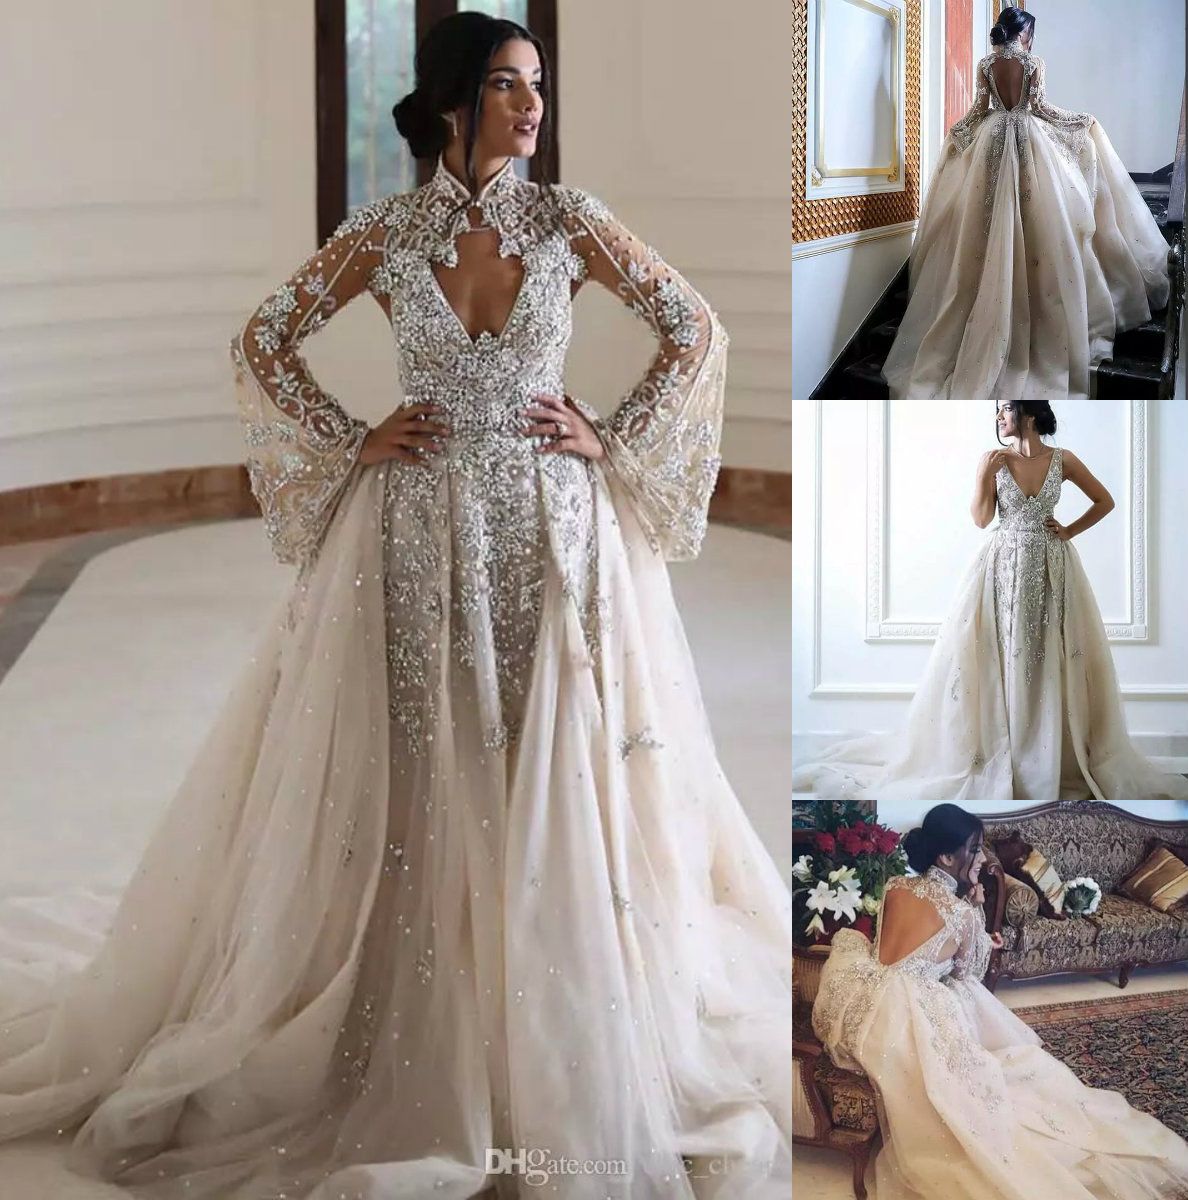 wedding dresses with capes 2019